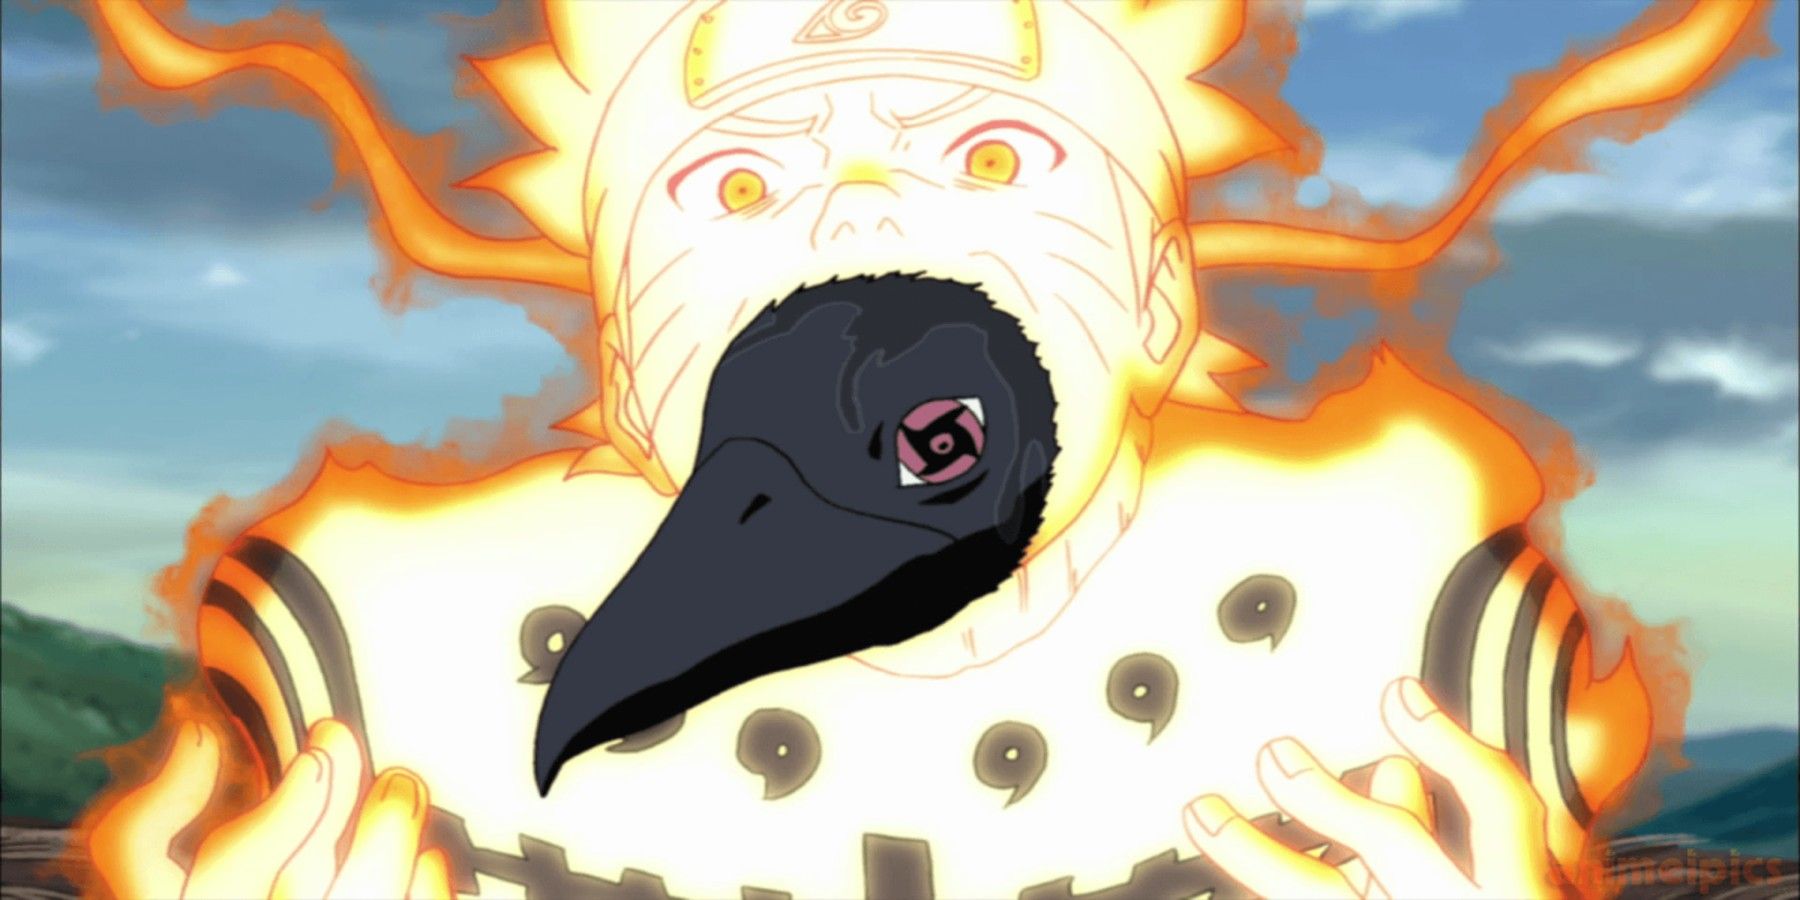 Itcahi crow naruto anime poster Paper Print - Birds posters in India - Buy  art, film, design, movie, music, nature and educational  paintings/wallpapers at Flipkart.com